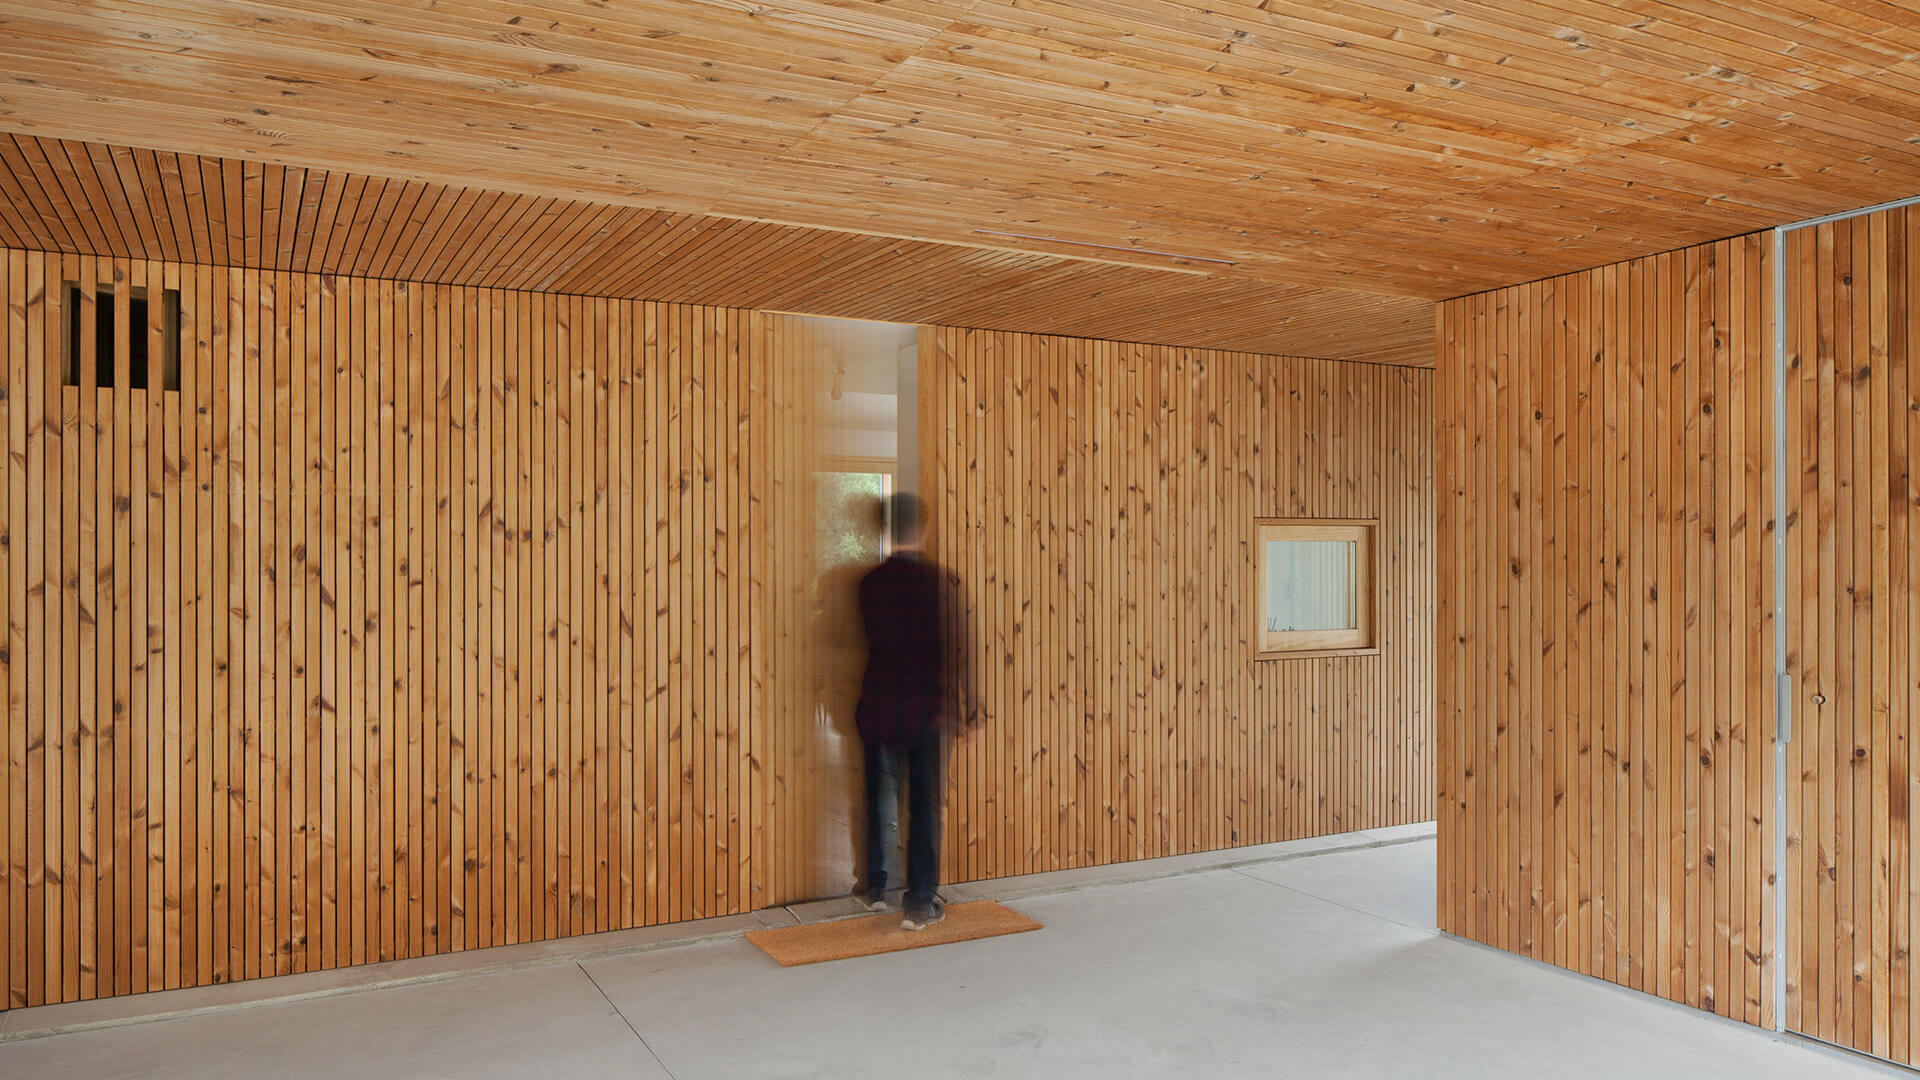 Wood Cladding Products That Can Stand The Test Of Time